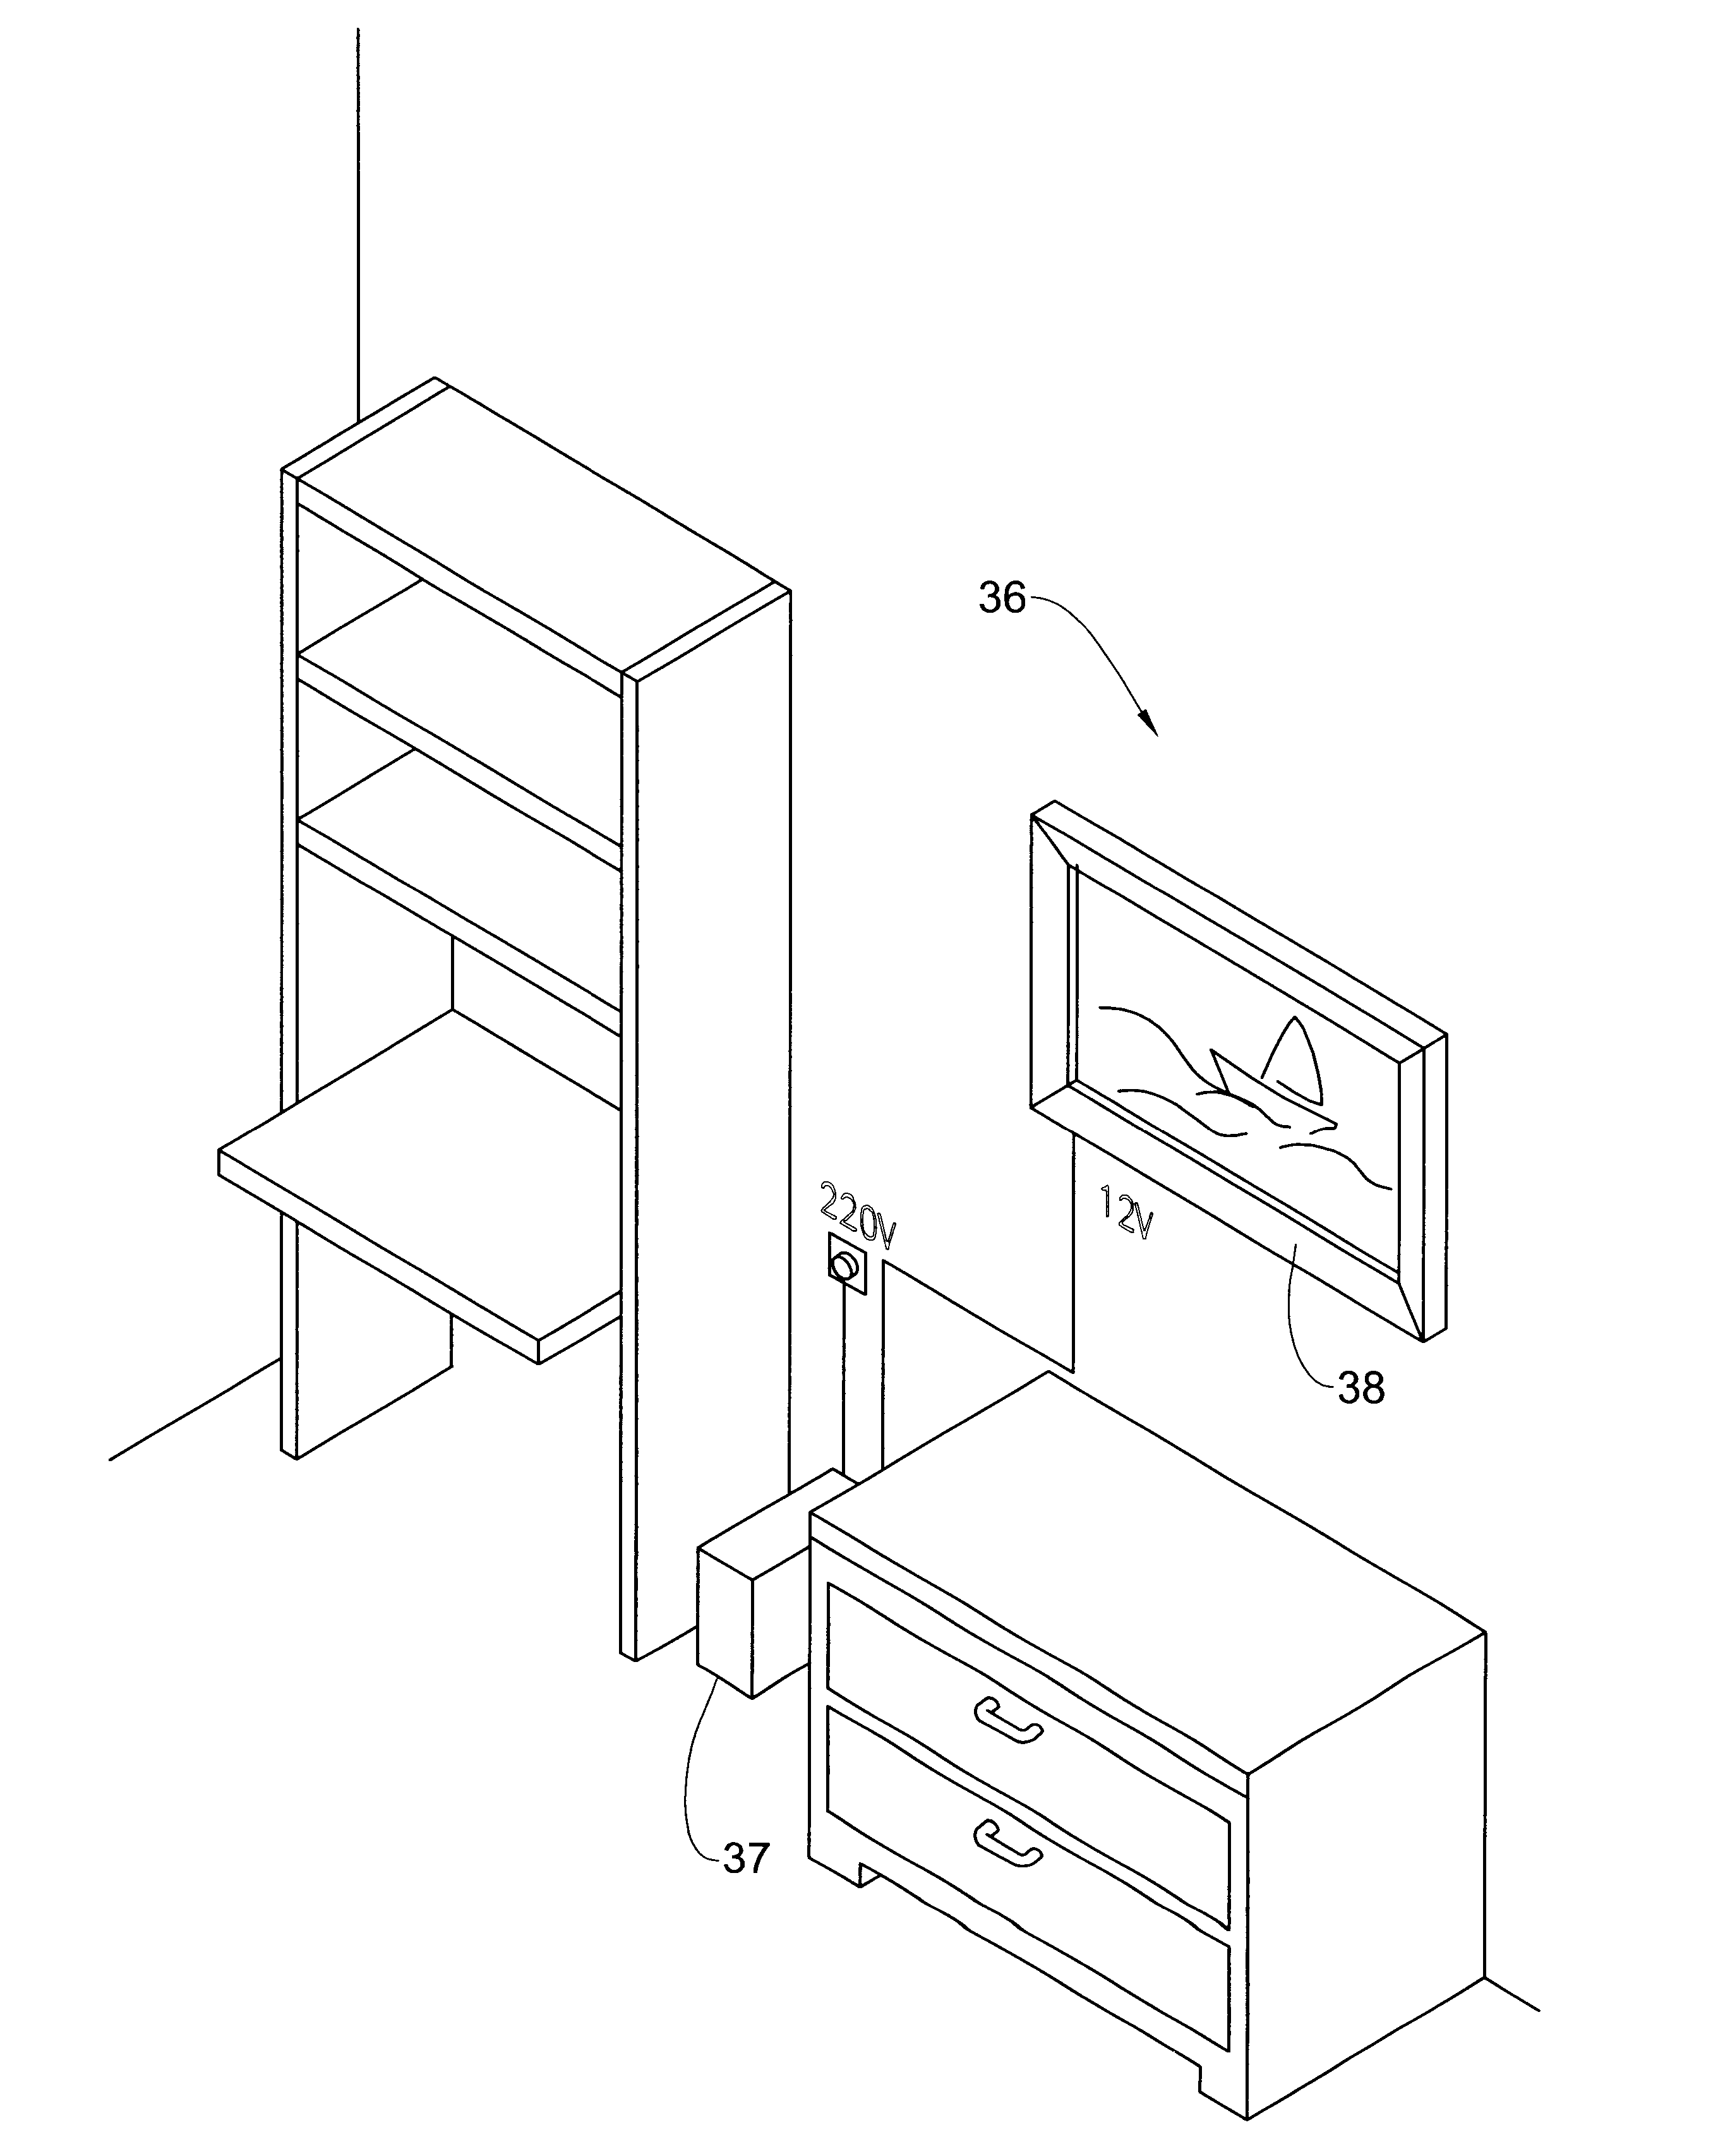 Electric heating devices and elements